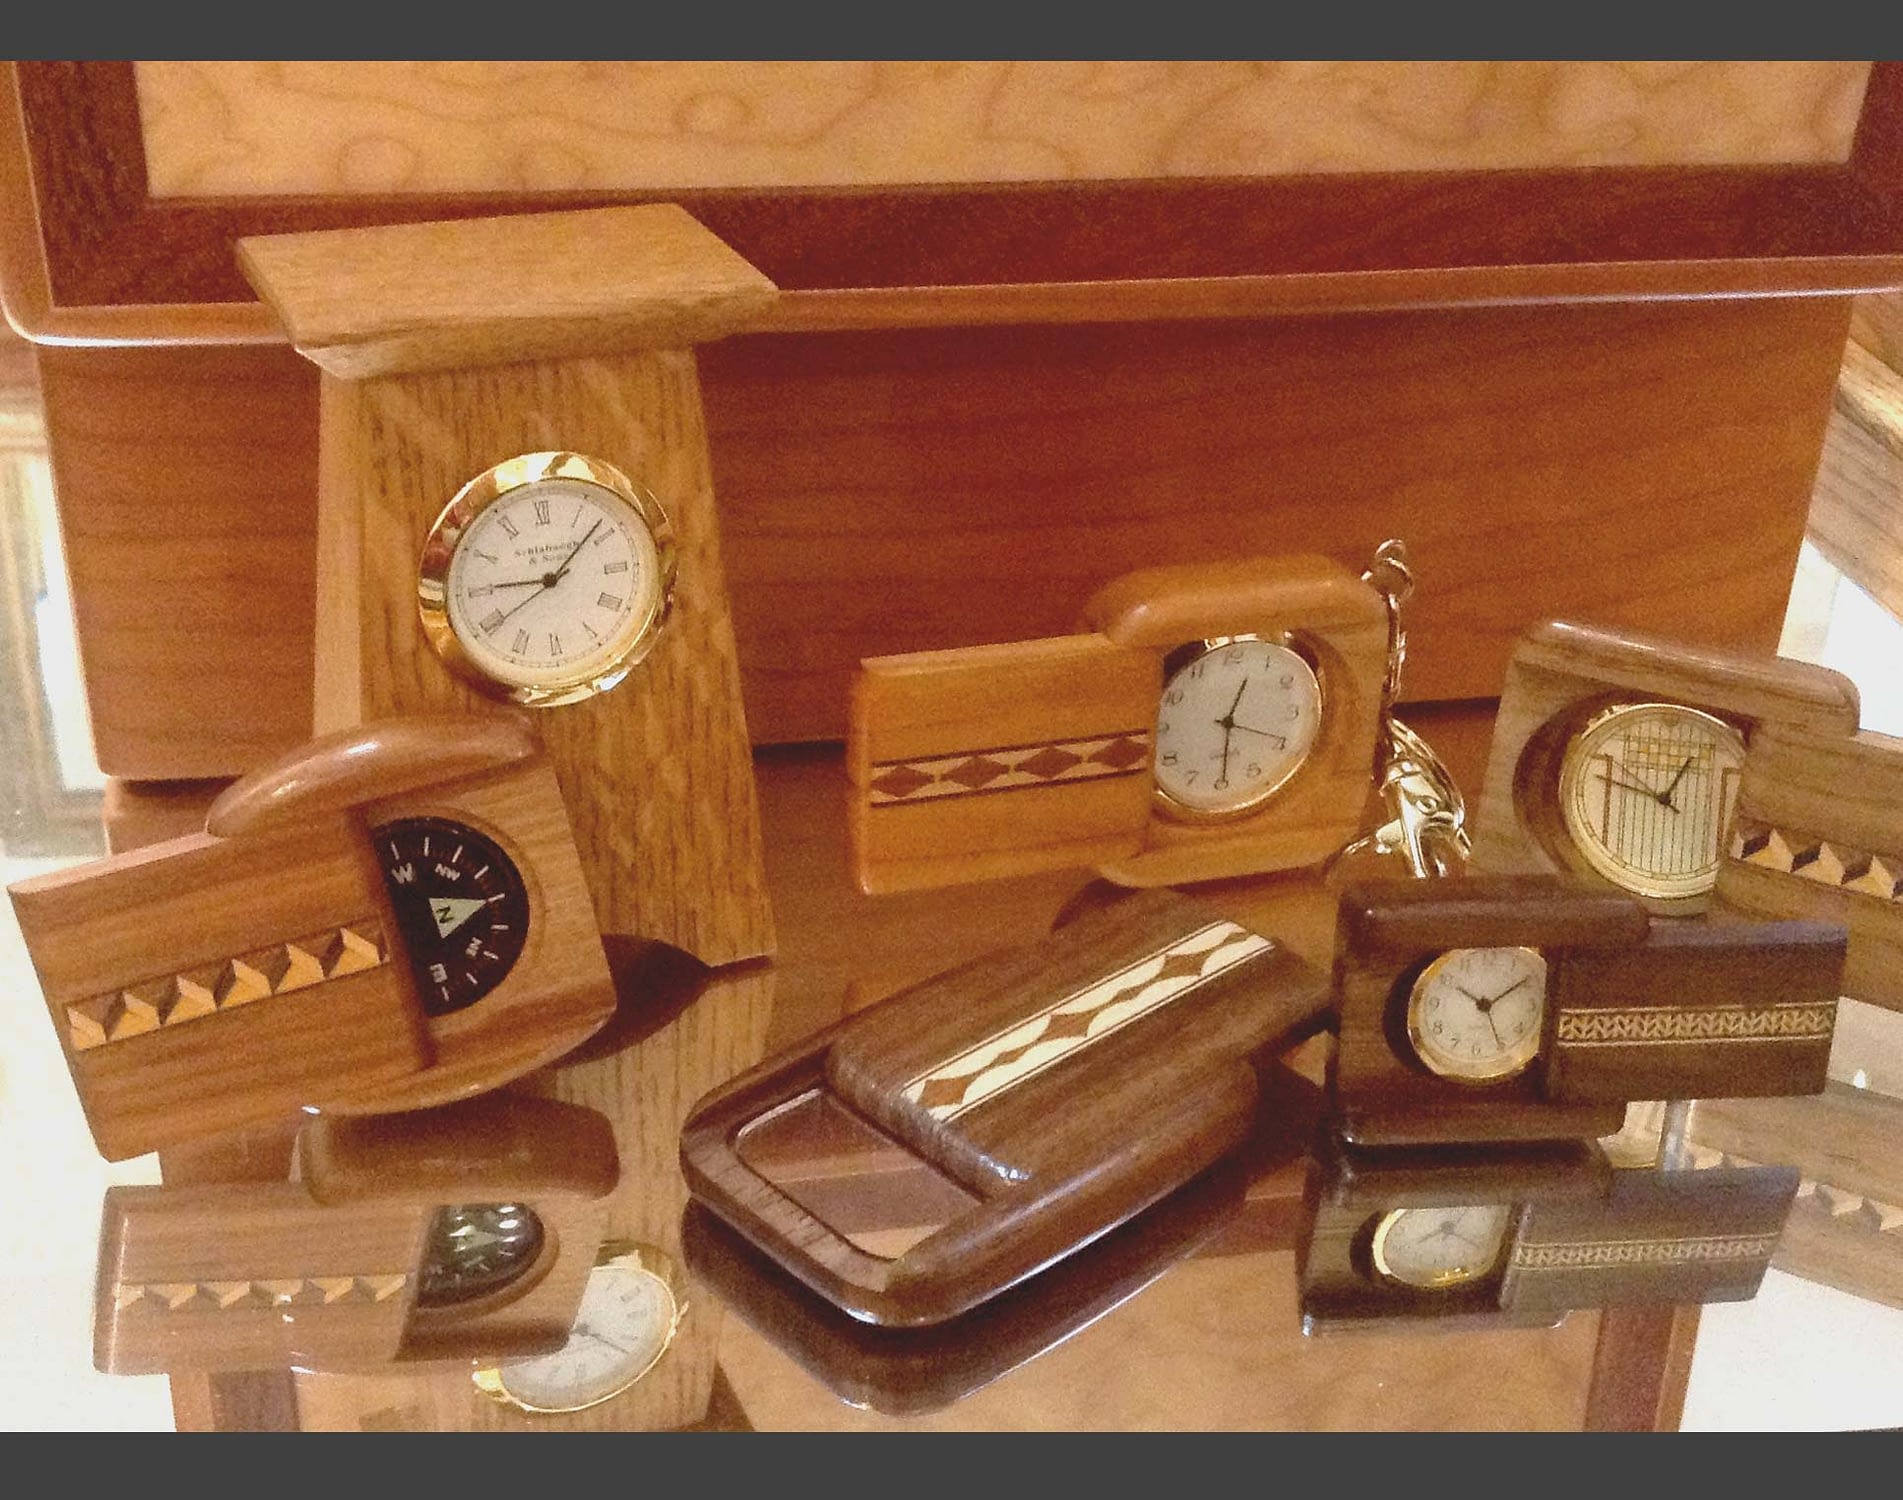 Custom wood turnings to hold various sized clocks from the Frame Cellar in Springhouse